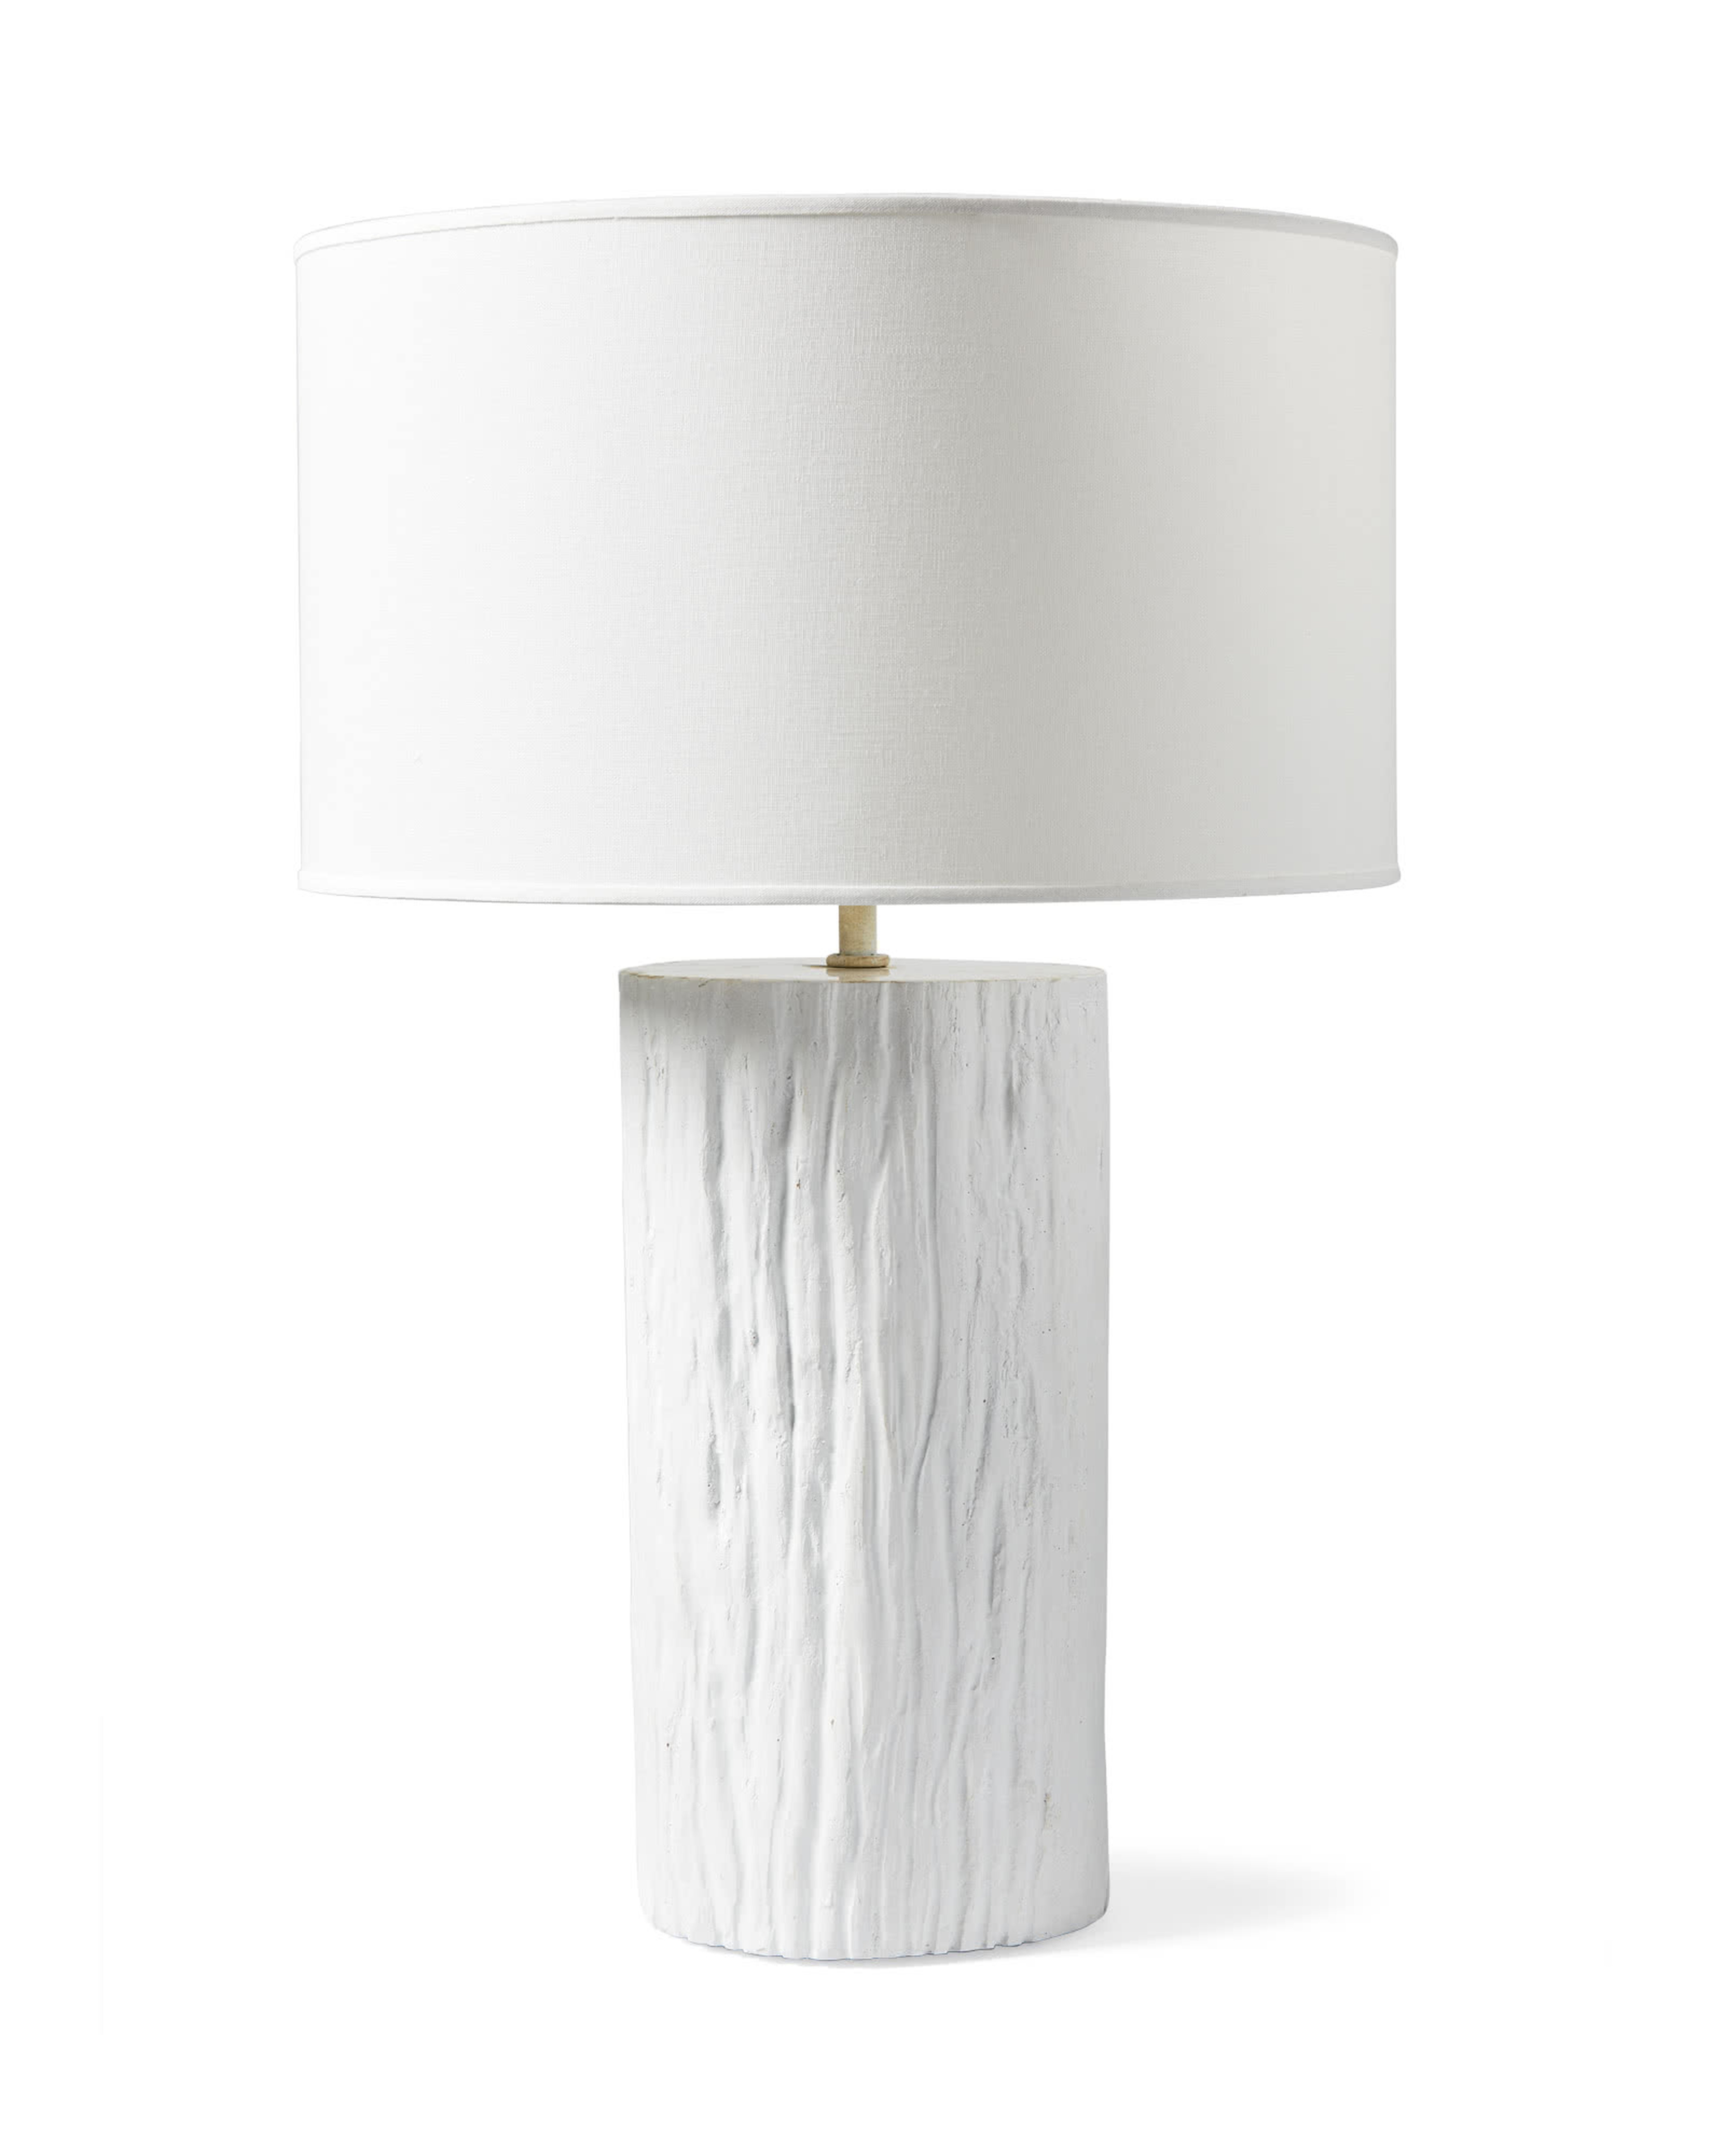 Truro Table Lamp - Serena and Lily